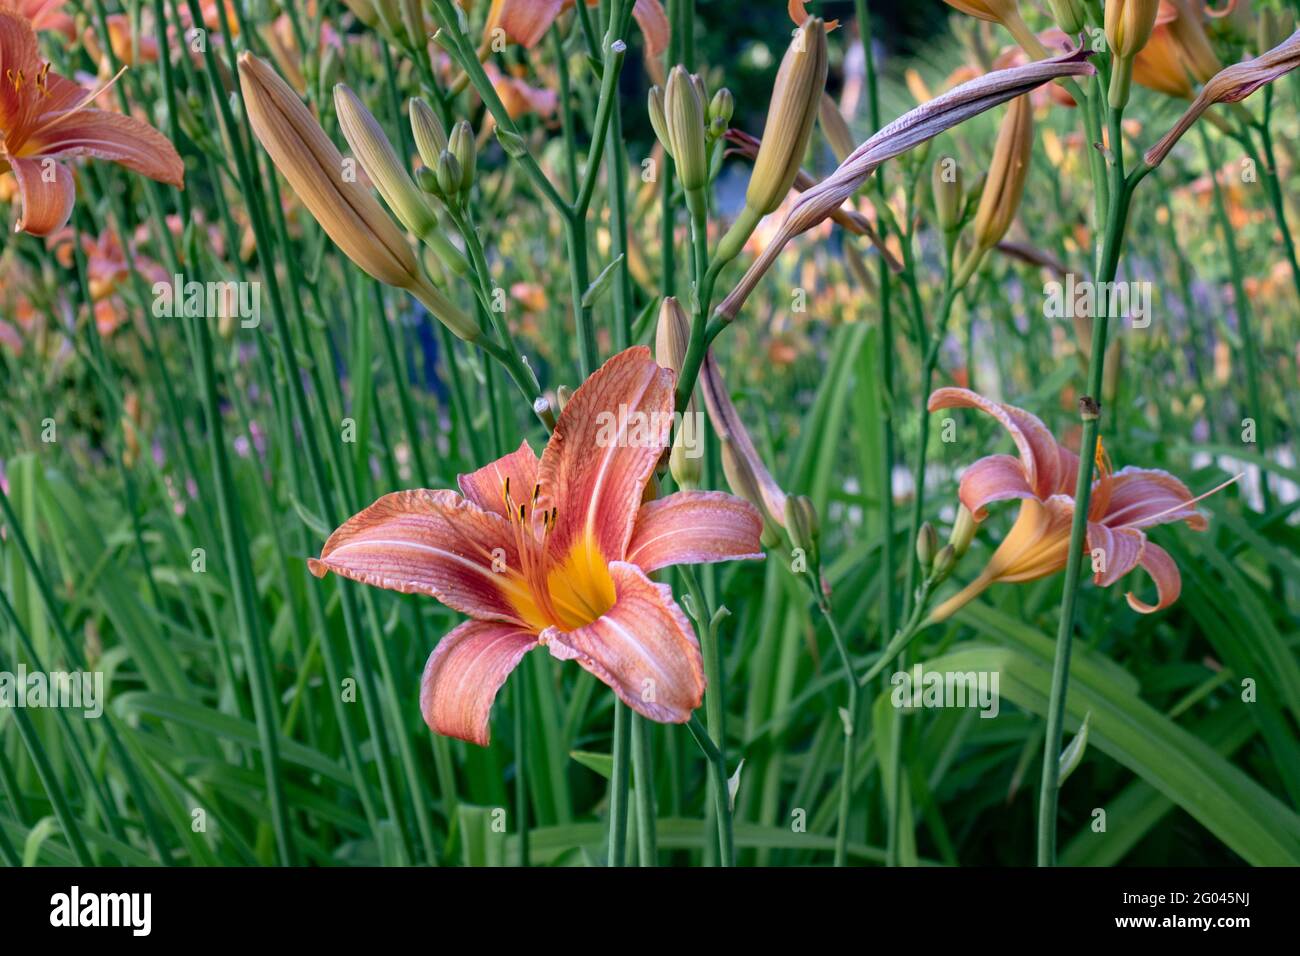 Orange day-lily (Hemerocallis fulva) also called tiger daylily in blooming field, closeup Stock Photo